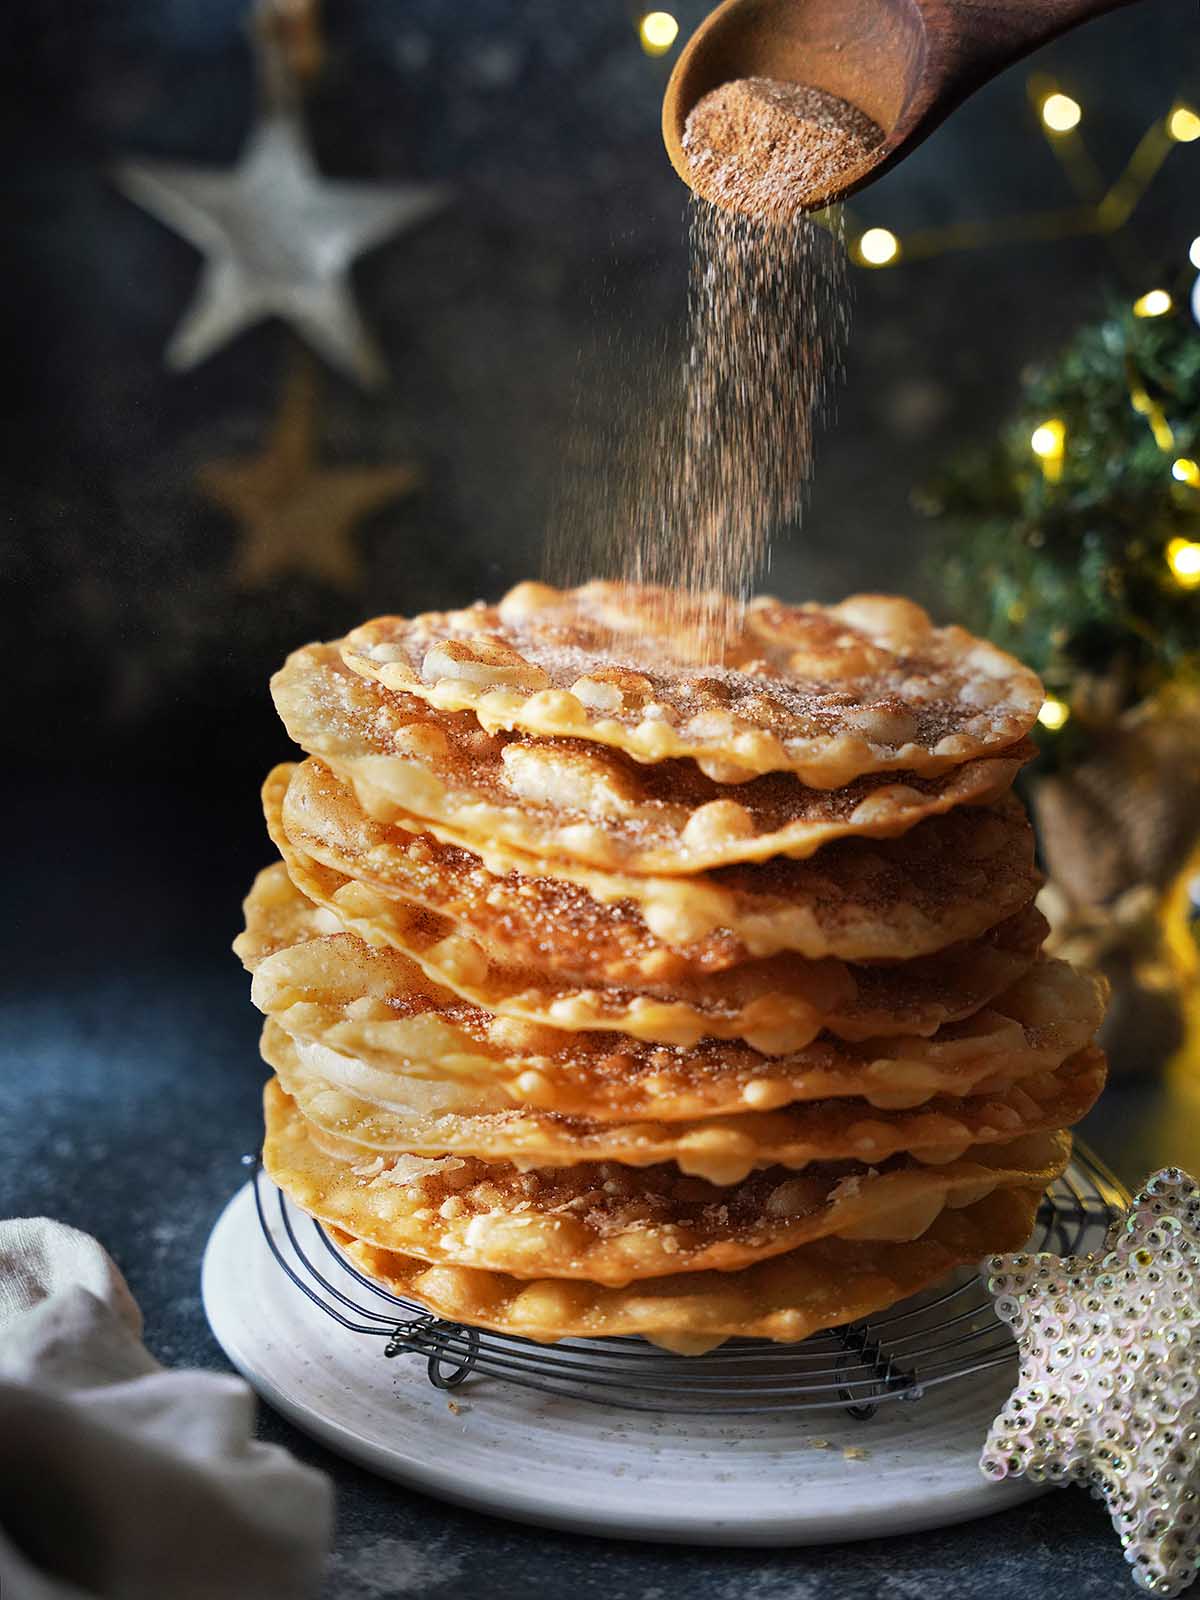 A stack of buñuelos on a white plate being sprinkled with cinnamon sugar.